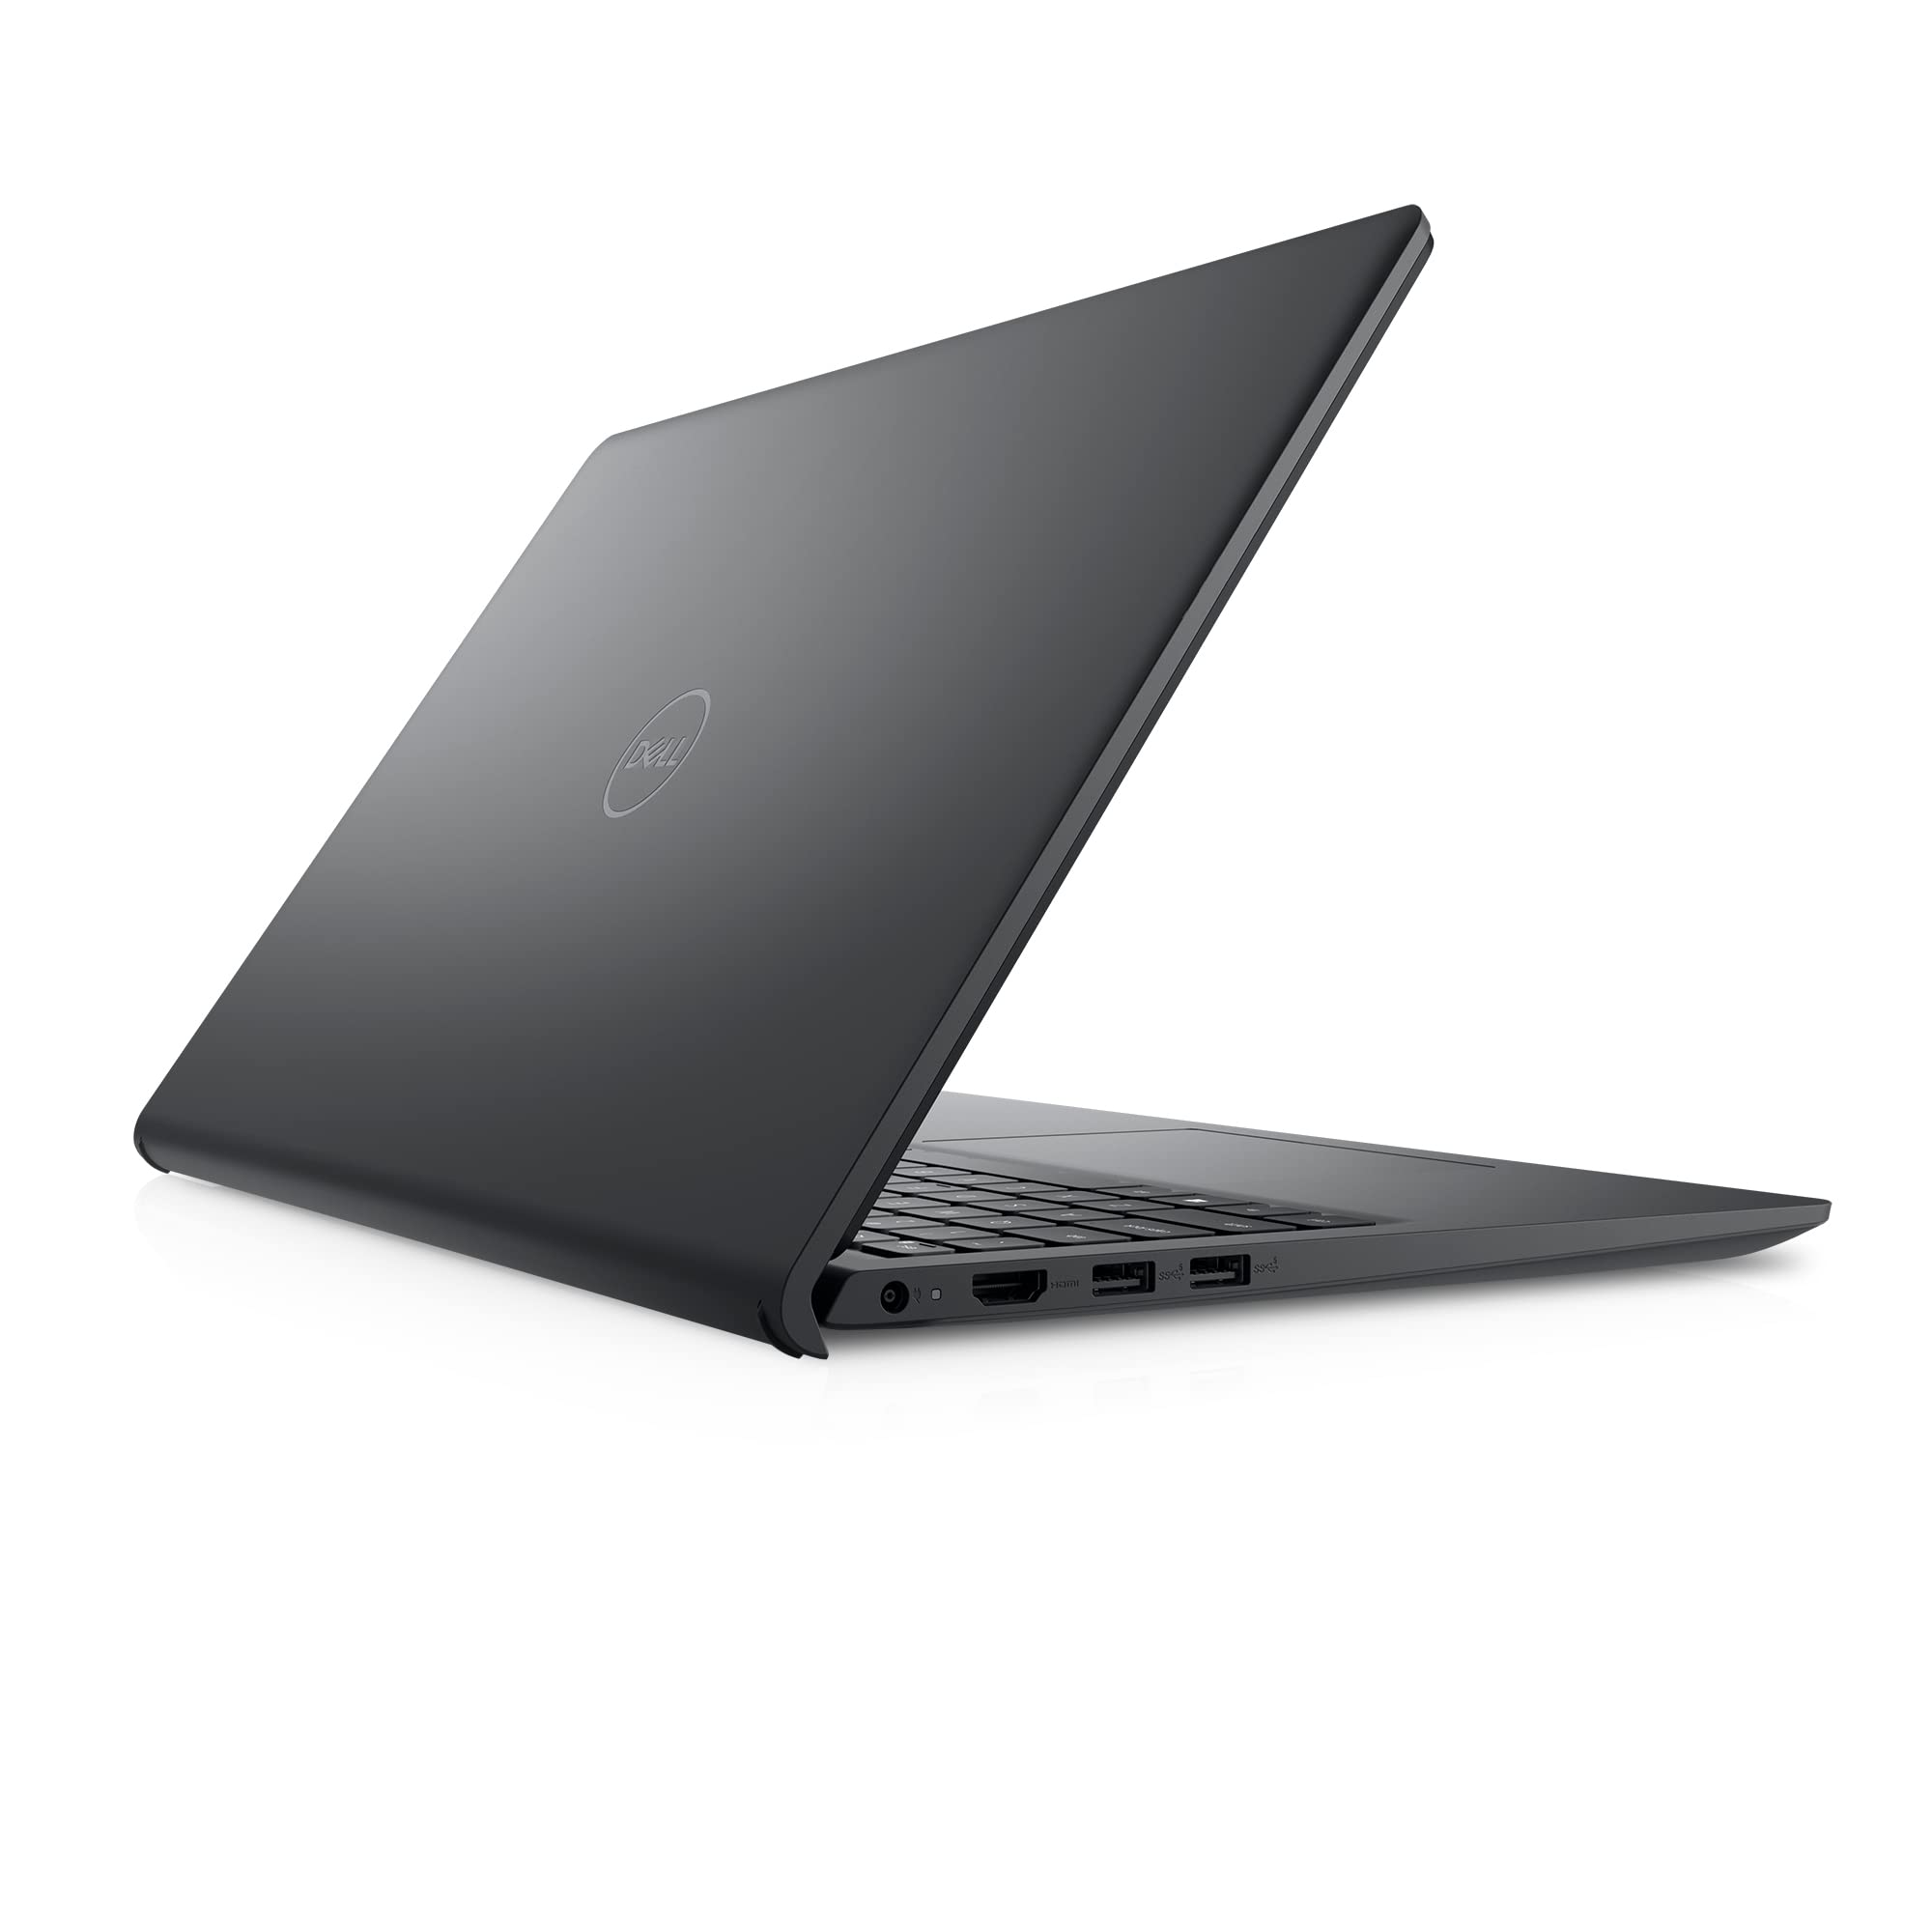 Dell Inspiron 15 3515 Notebook